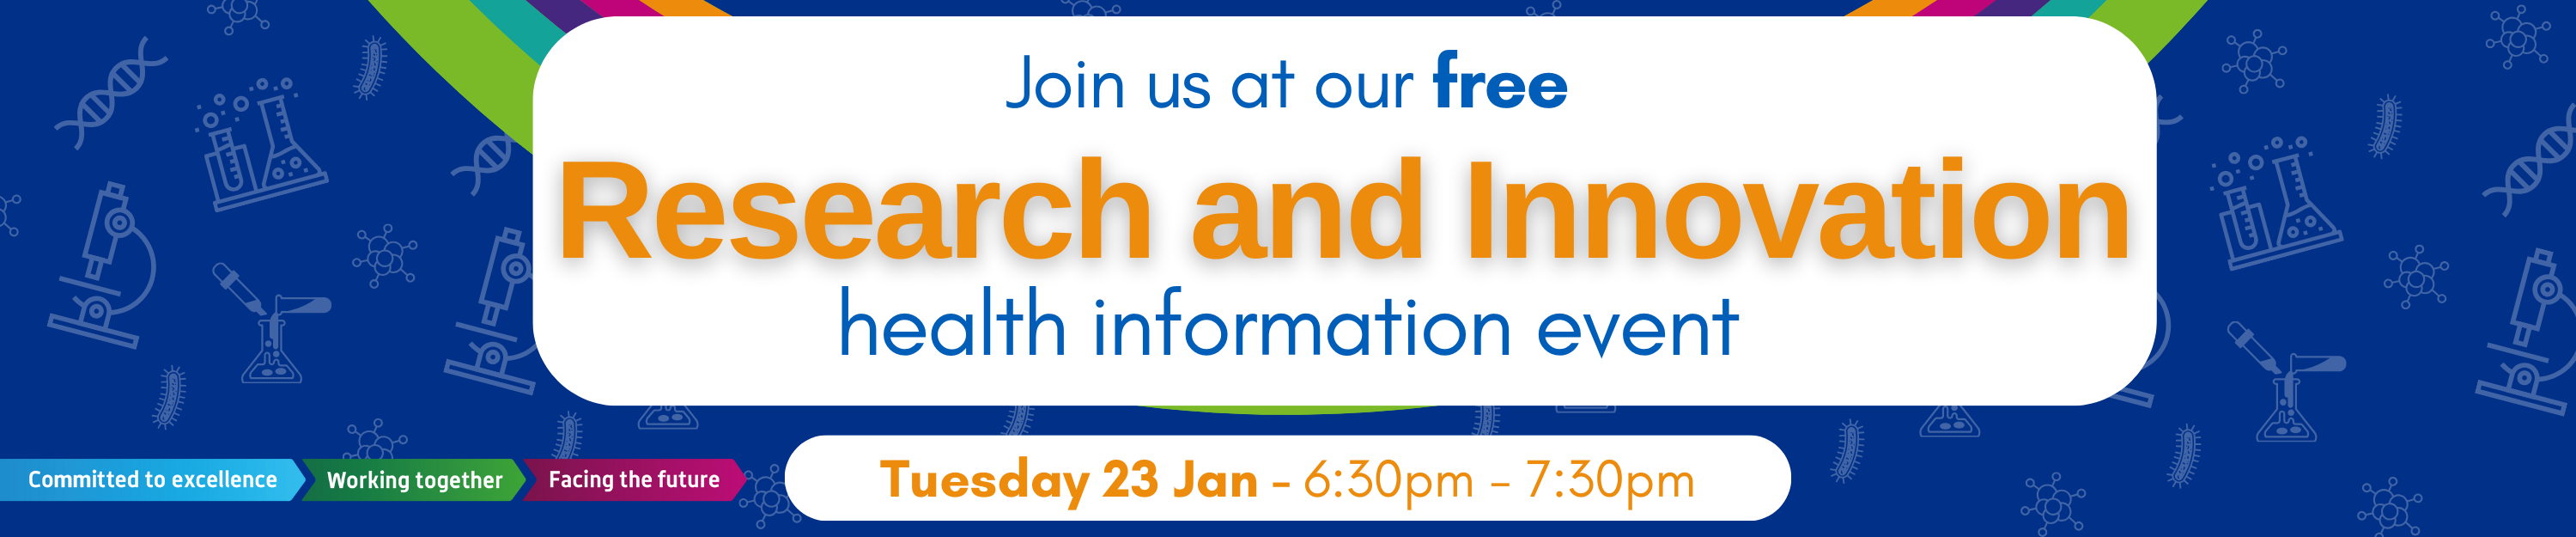 Learn about research and innovation at this month’s free online health event